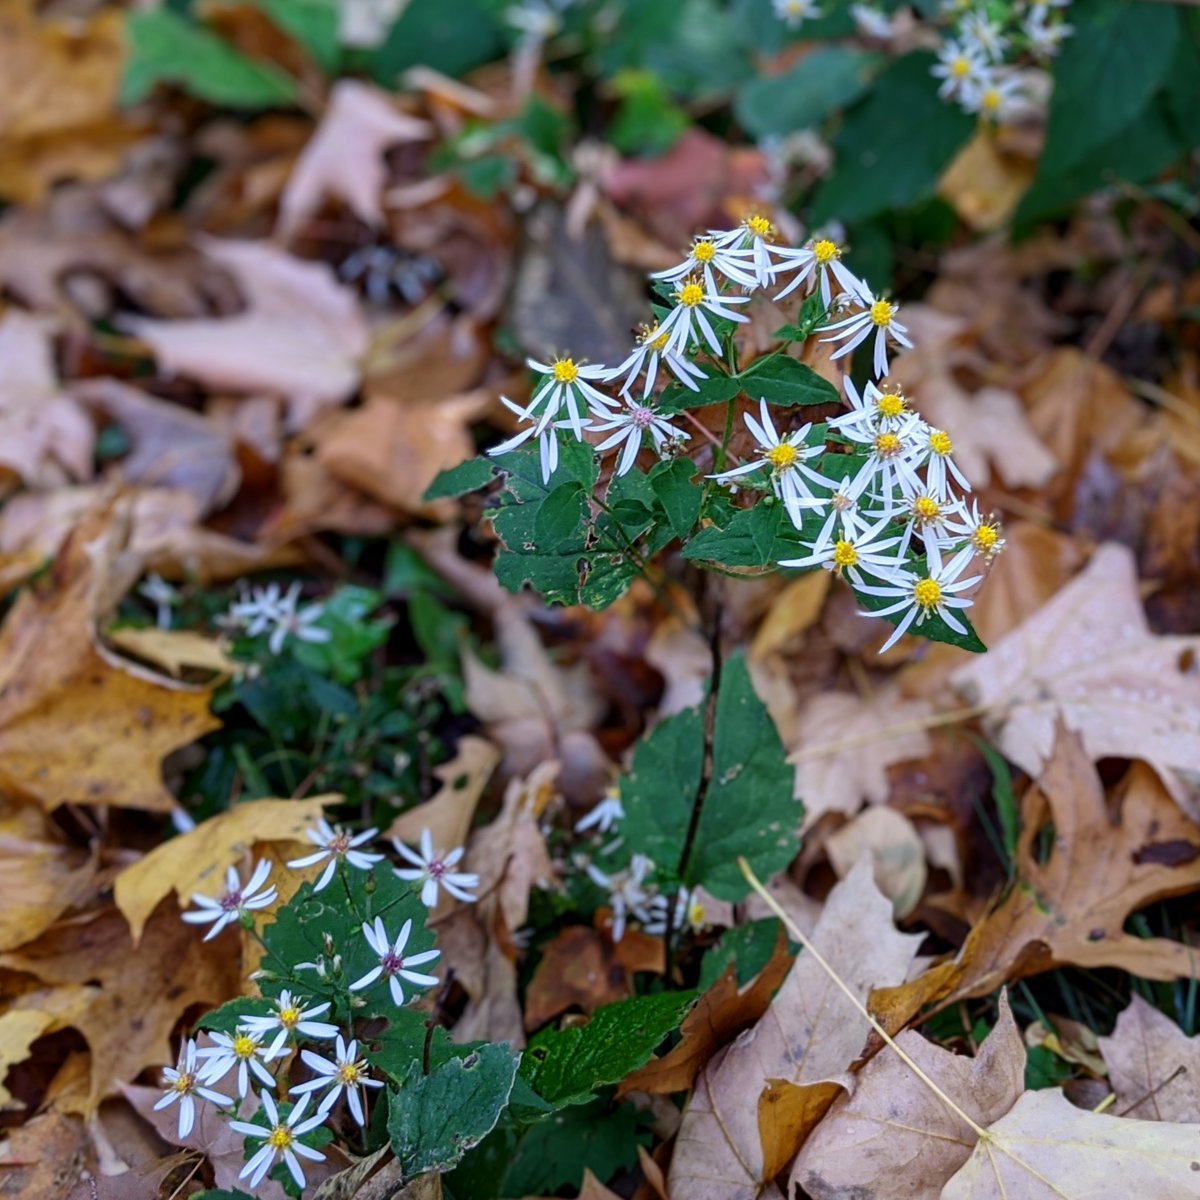 There were tiny wildflowers on the forest floor.